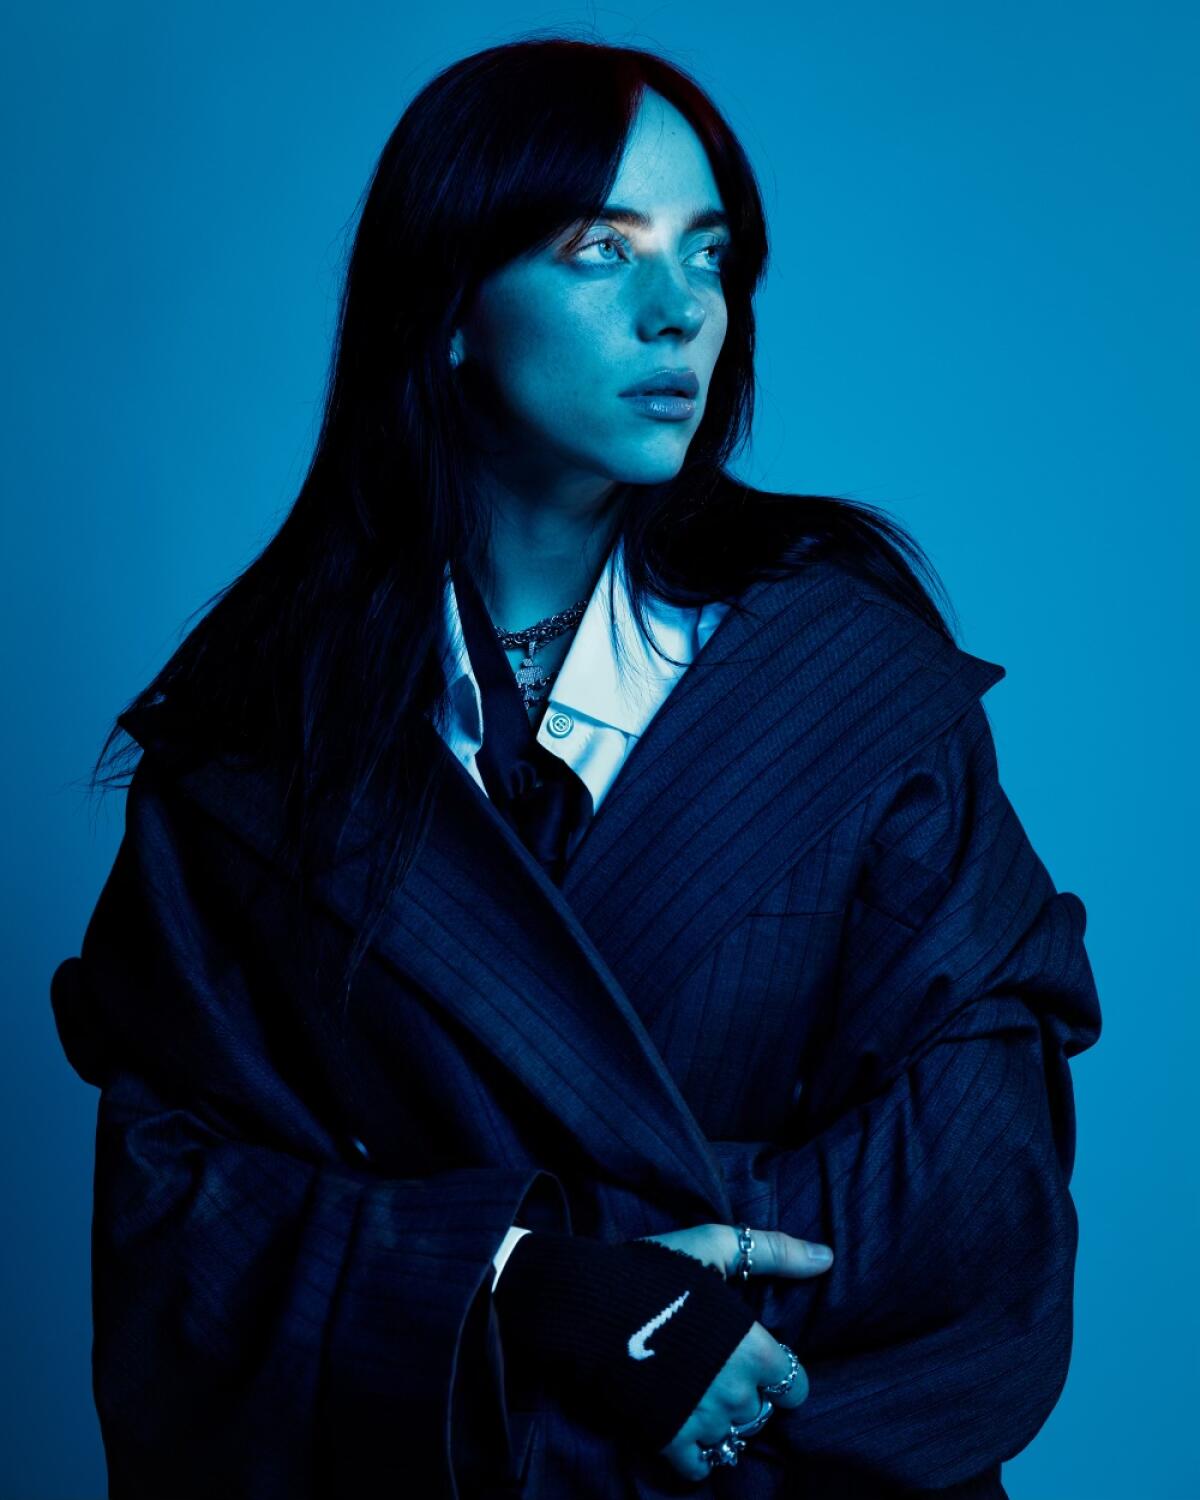 A woman with dark hair looks to her left in a cyan-tinted photo